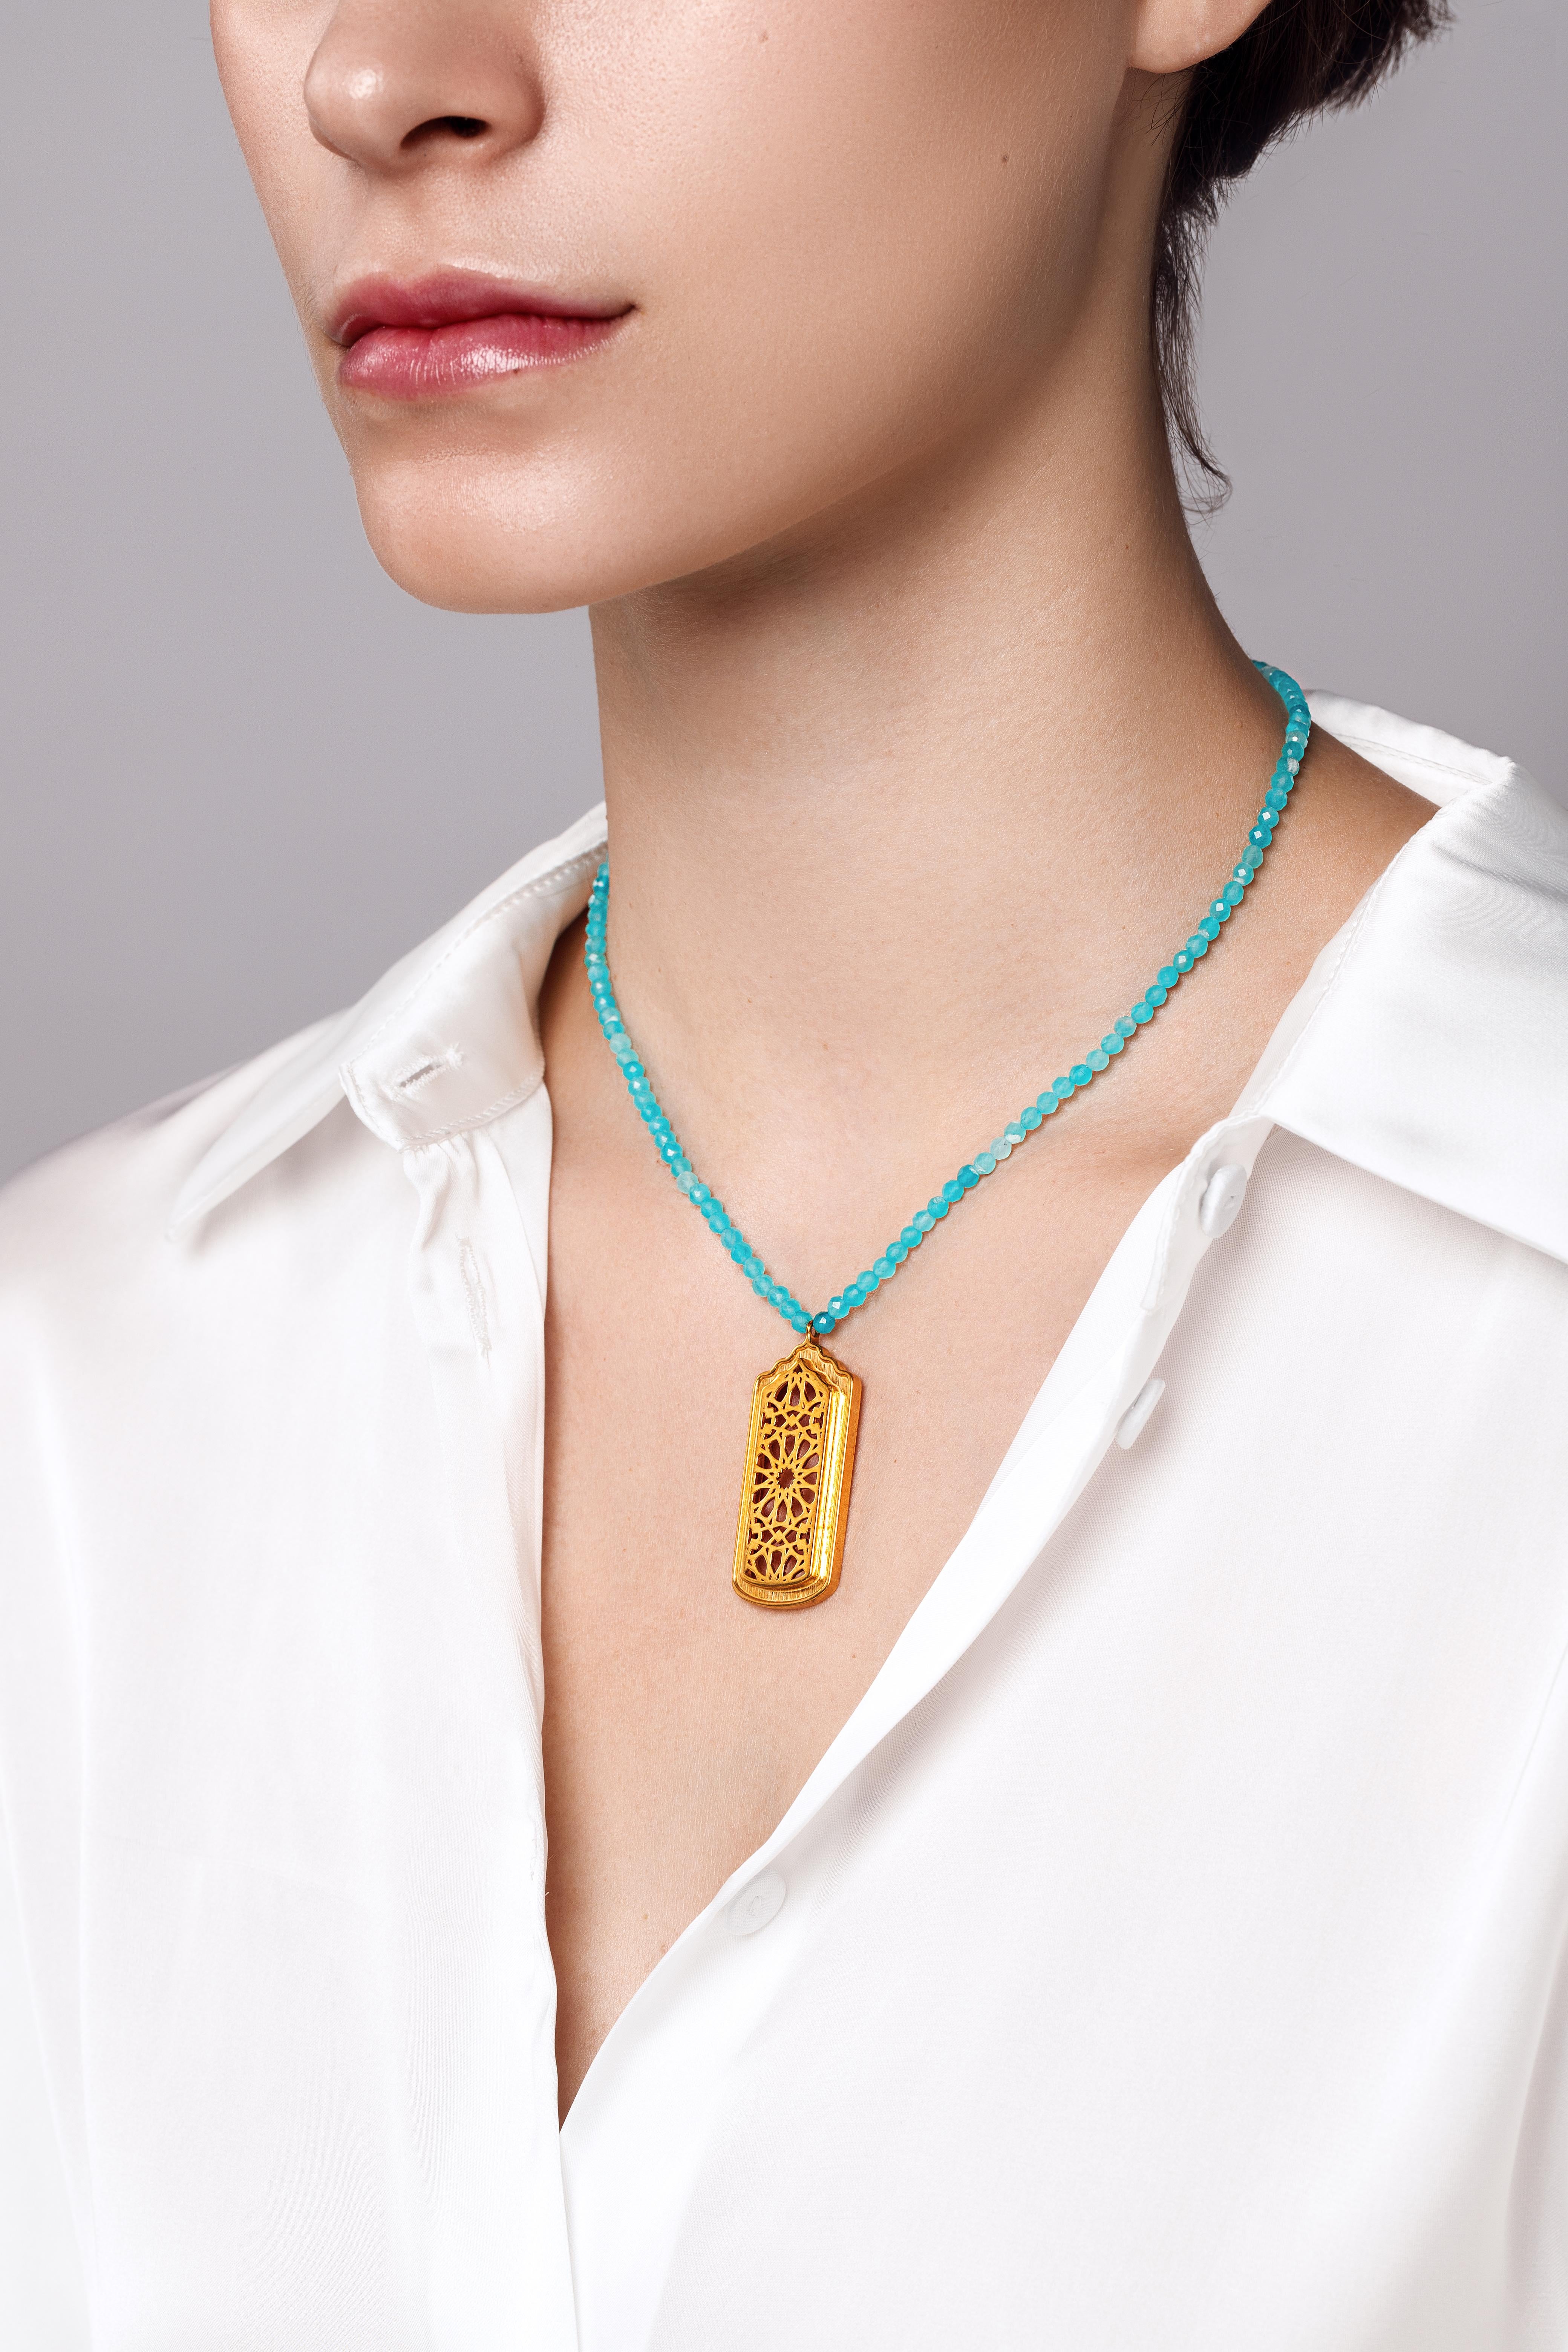 Orosi necklace in 18K solid yellow gold and natural amazonite was designed by Sanaz Doost, Artist & founder of Sanaz Doost Jewelry and inspired by Orosi which is a typical architectural elements of ancient houses and buildings of Middle East &